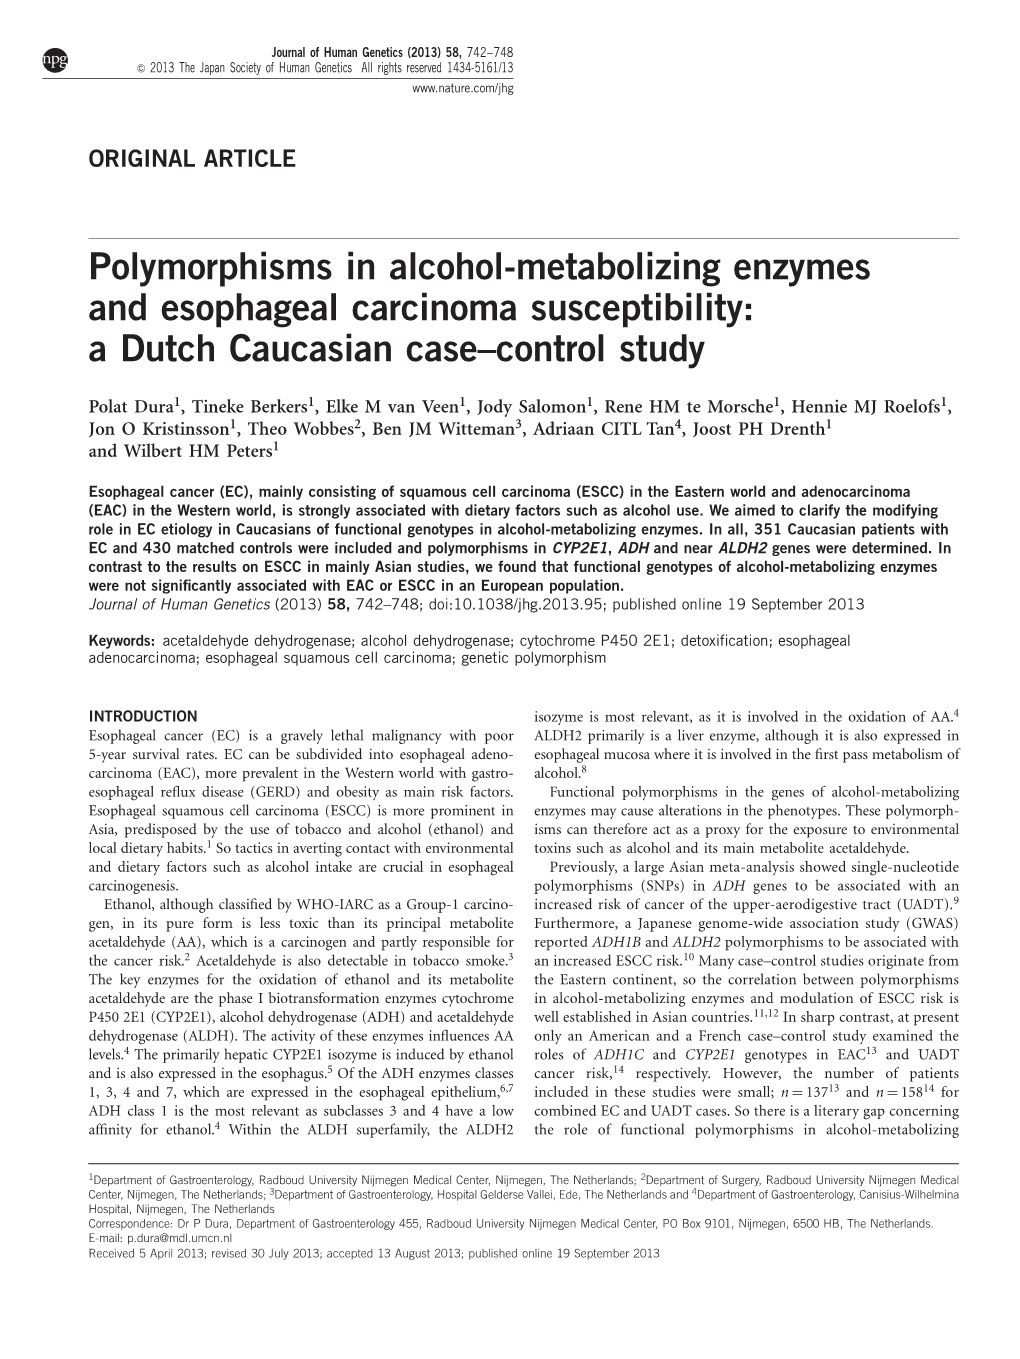 Polymorphisms in Alcohol-Metabolizing Enzymes and Esophageal Carcinoma Susceptibility: a Dutch Caucasian Case–Control Study